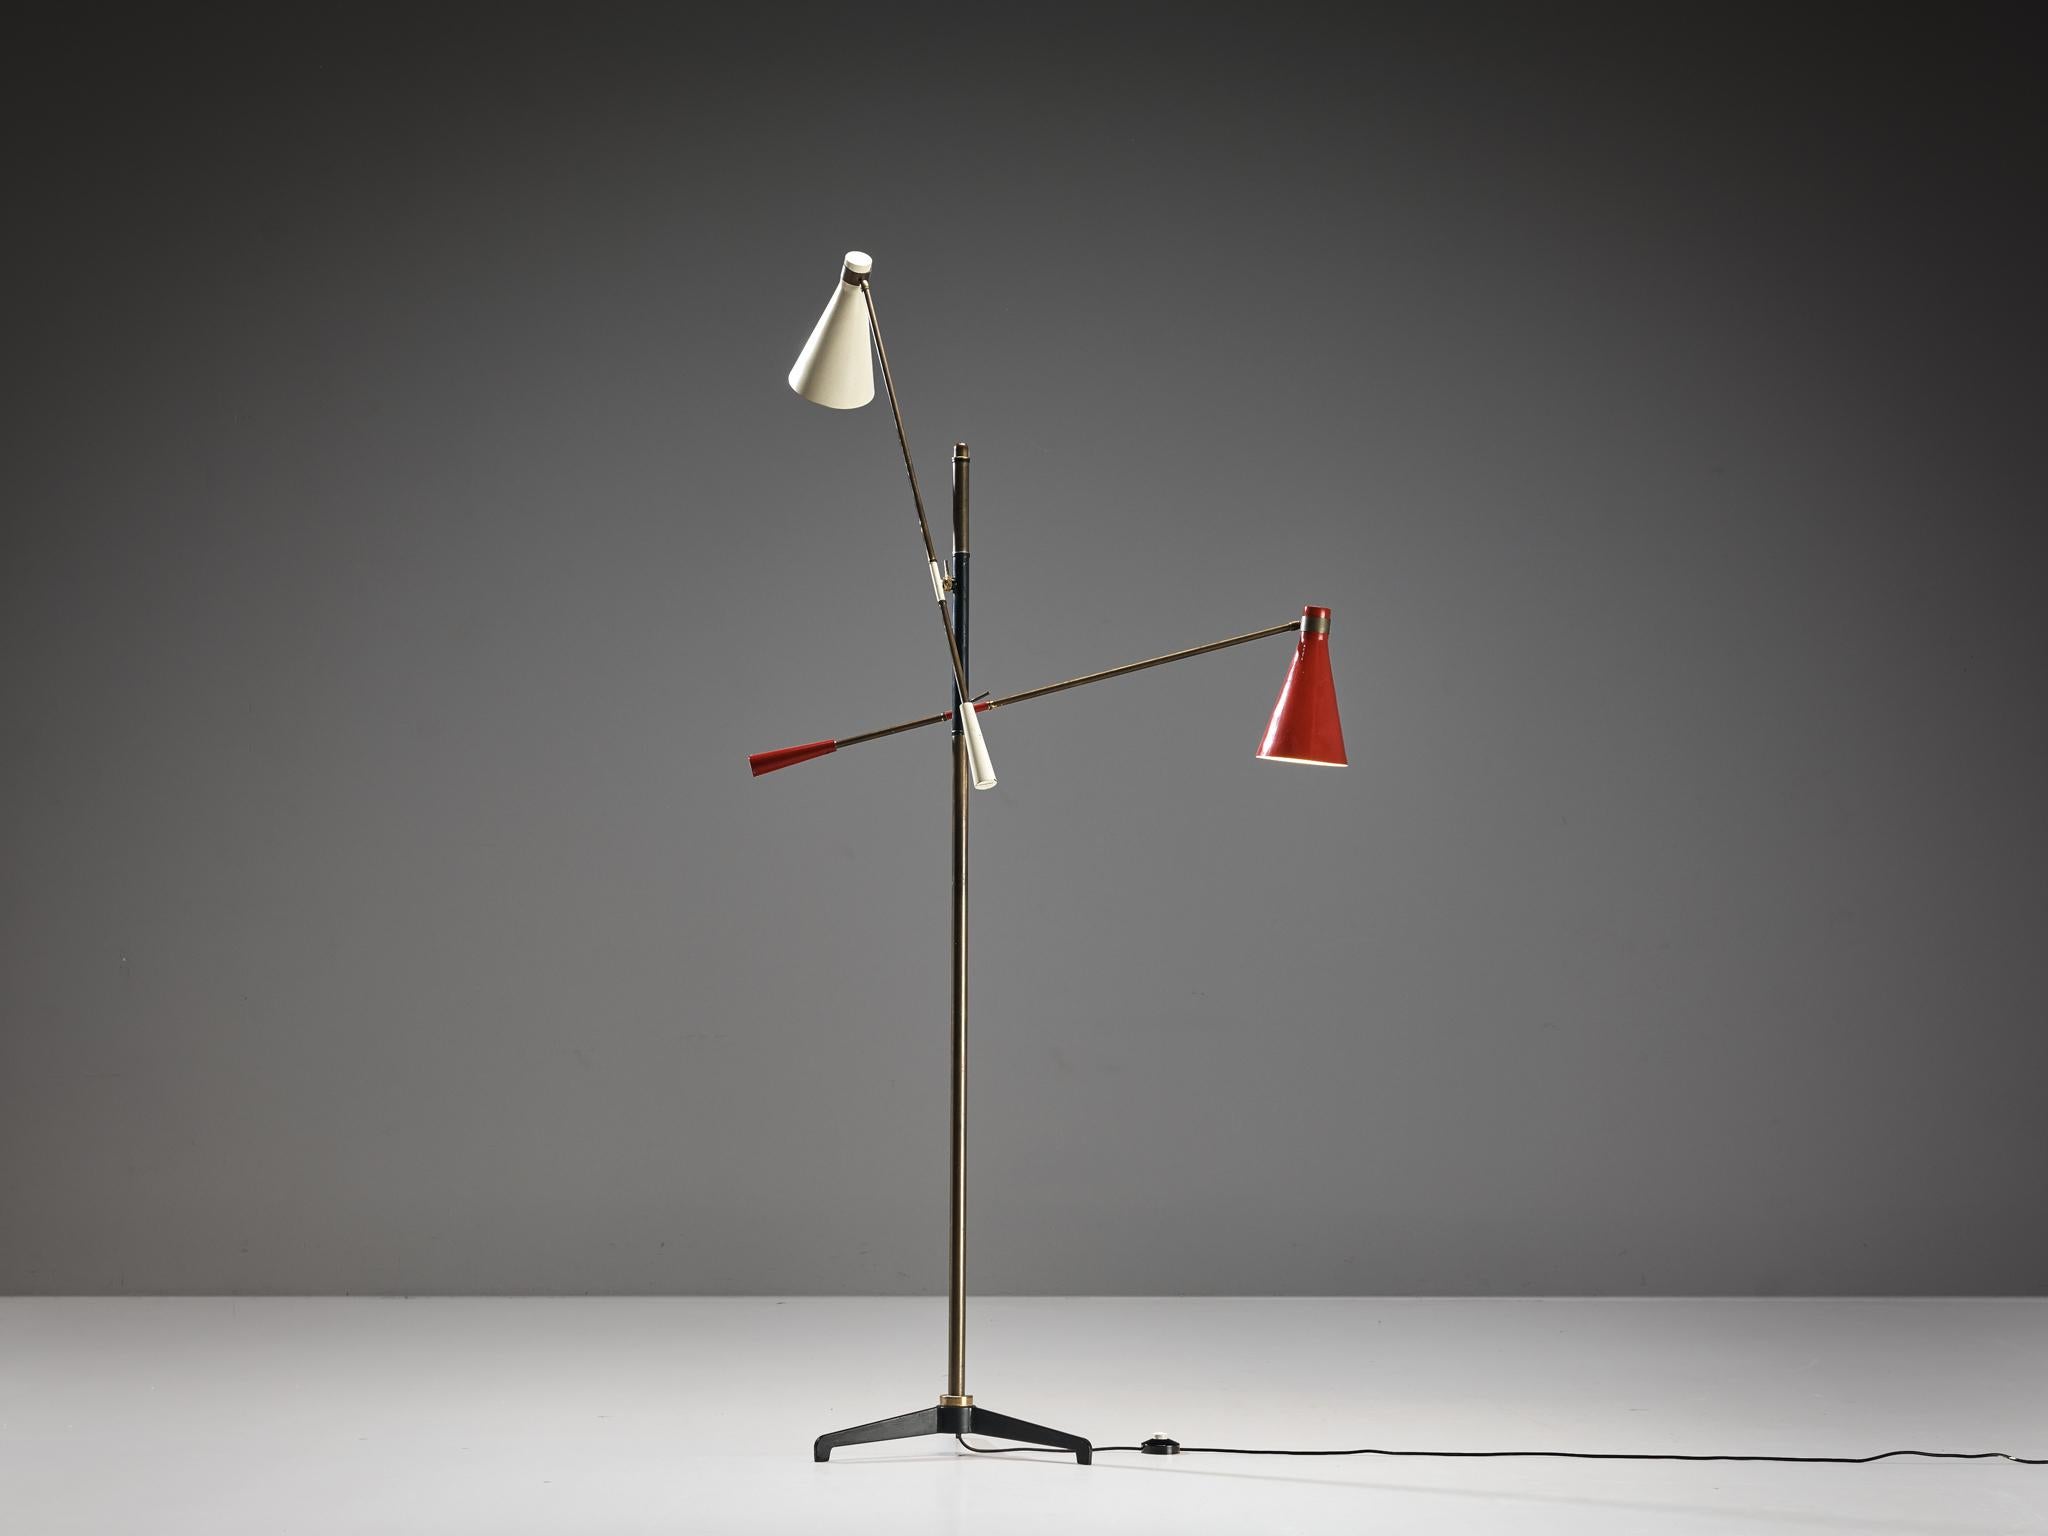 Floor lamp, enameled aluminum, brass, steel, Italy, 1950s

An Italian floor lamp with two gracefully extended arms. The design reminds of the Triennale lamp designed by Angelo Lelii for Arredoluce in 1947. An intriguing feature is the lamp's